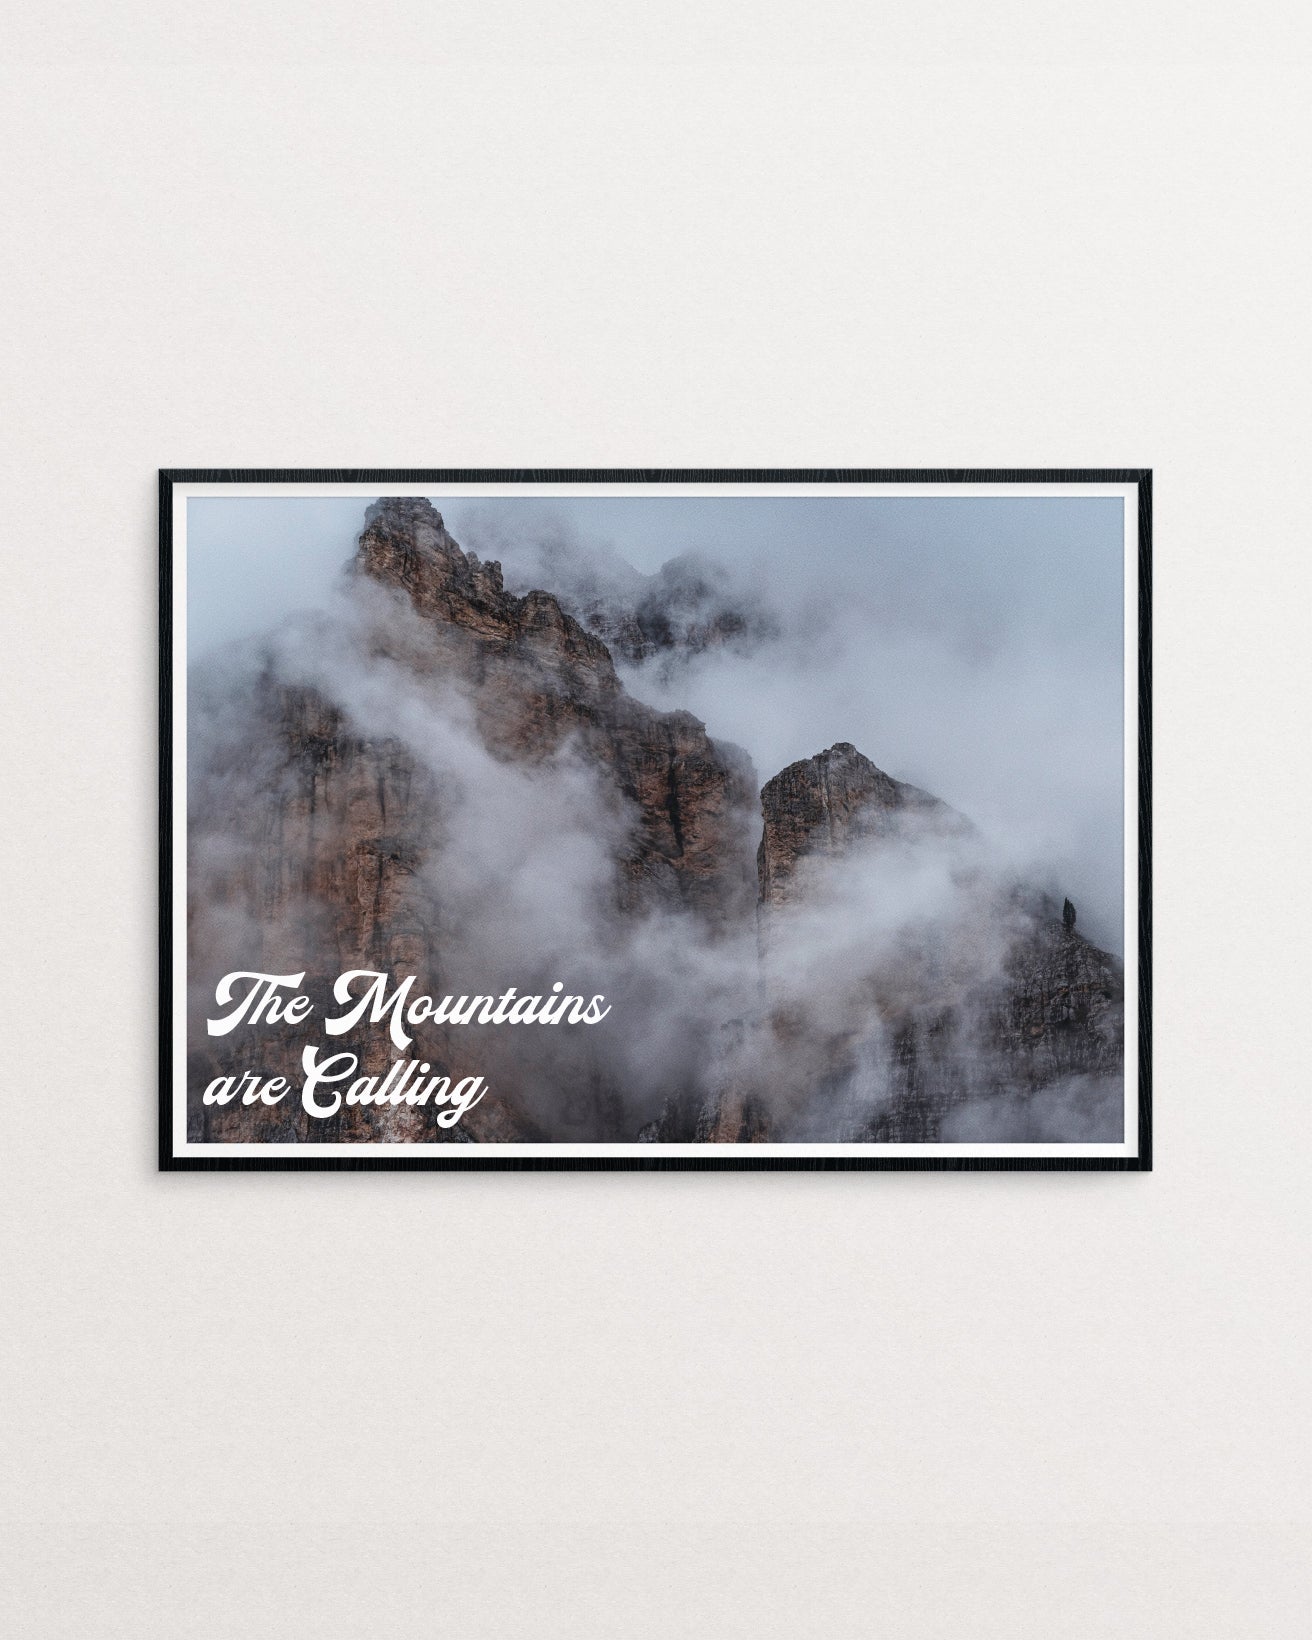 The Mountains Are Calling - Photographic Print